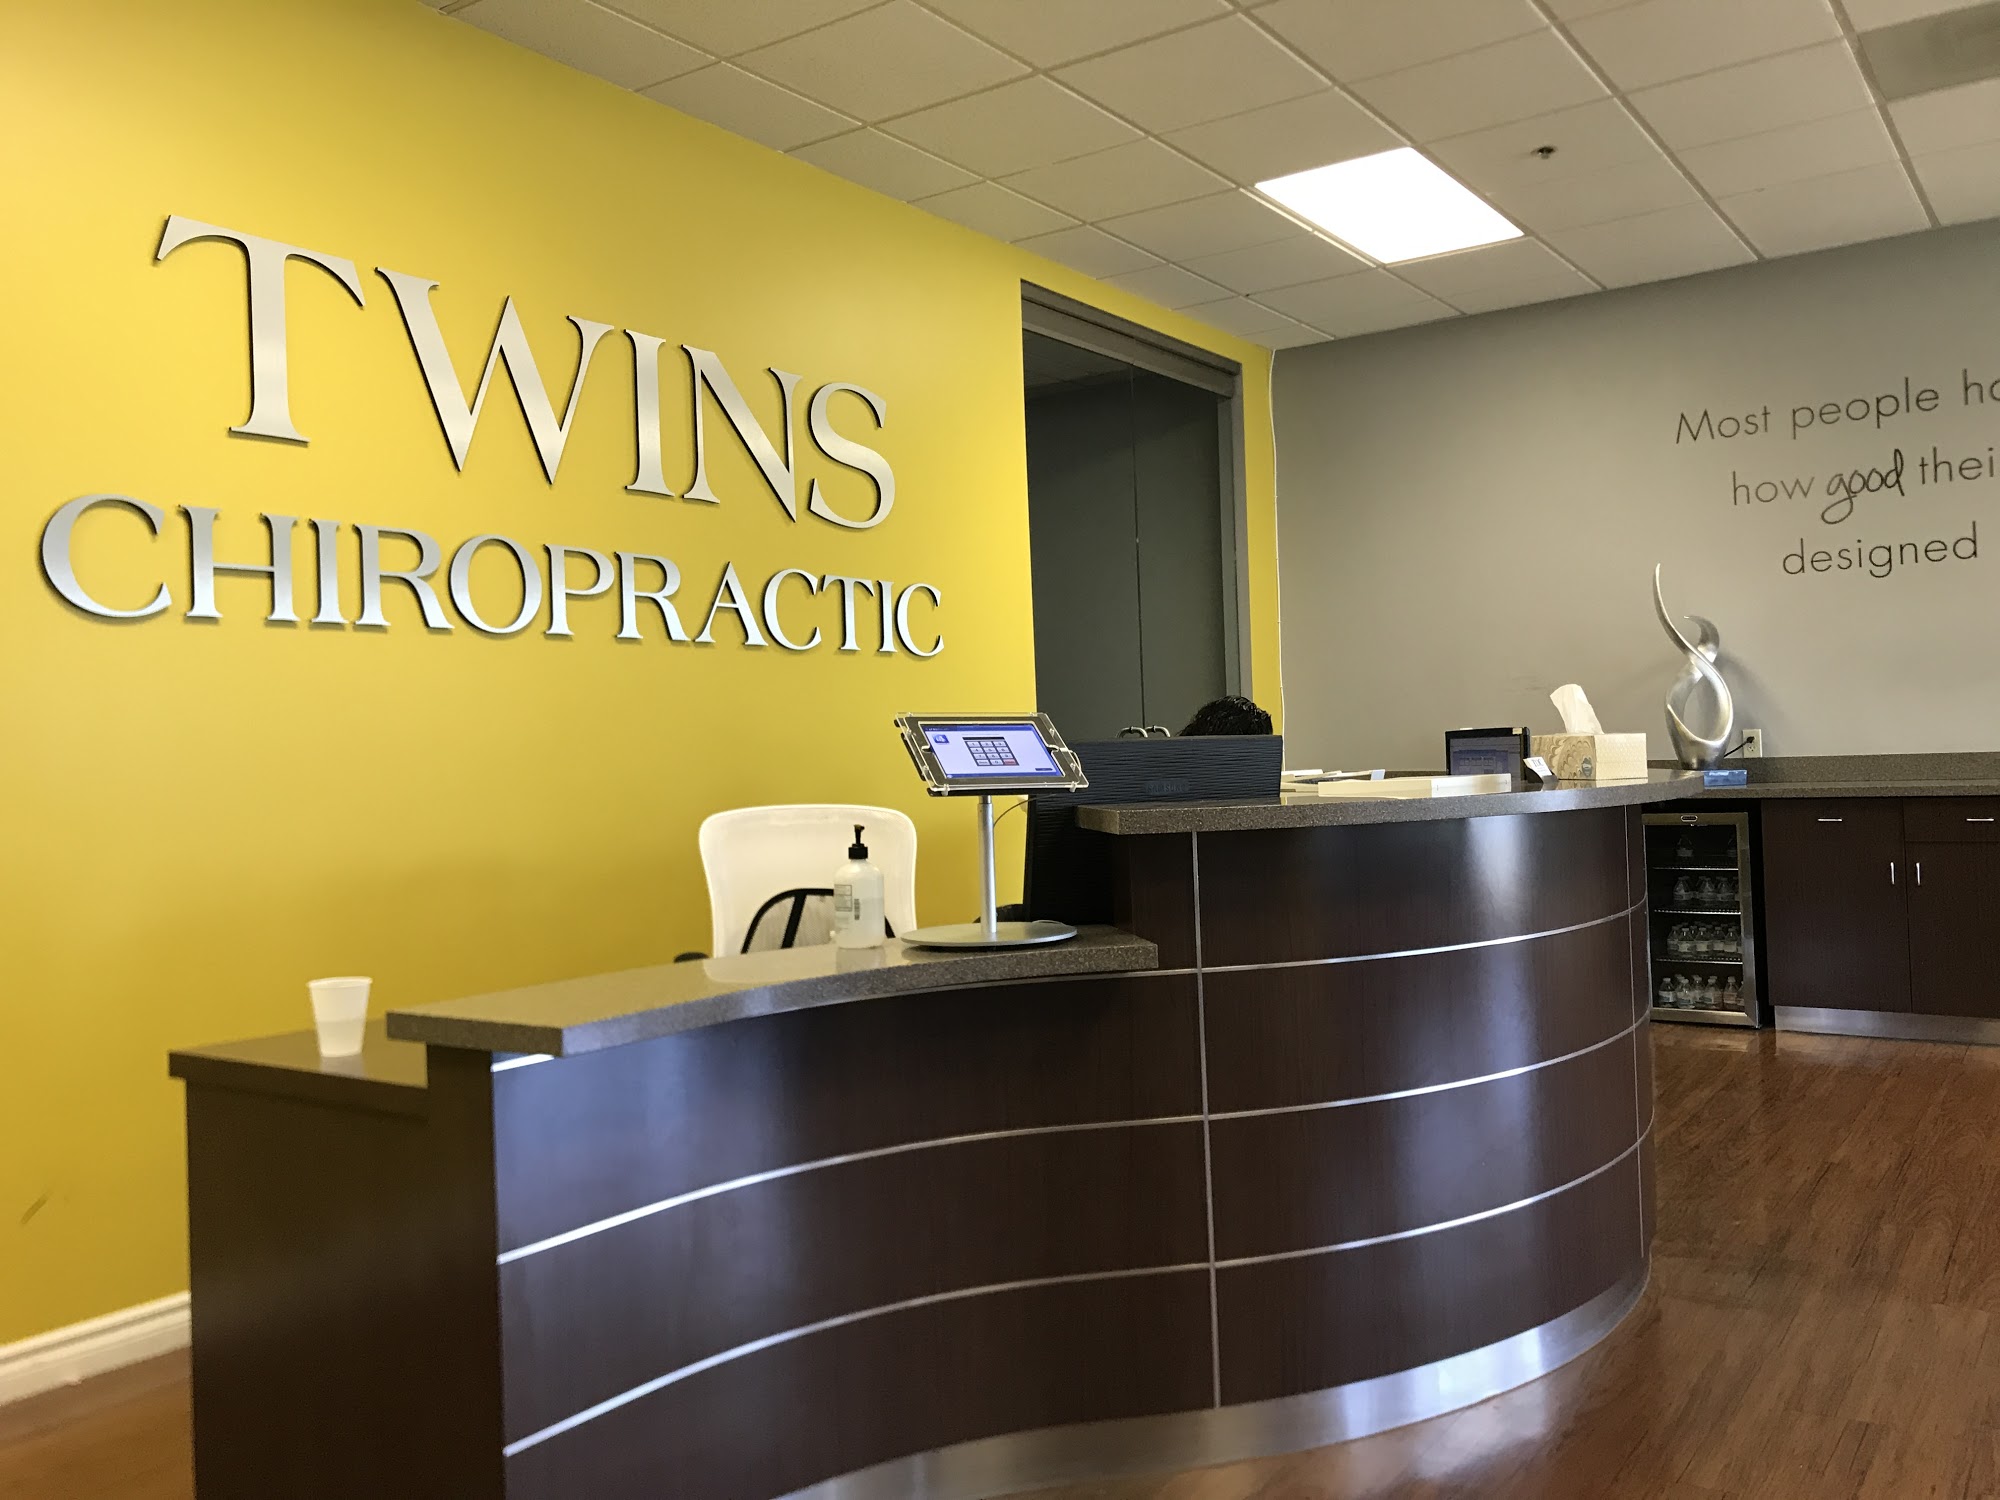 Twins Chiropractic and Physical Medicine